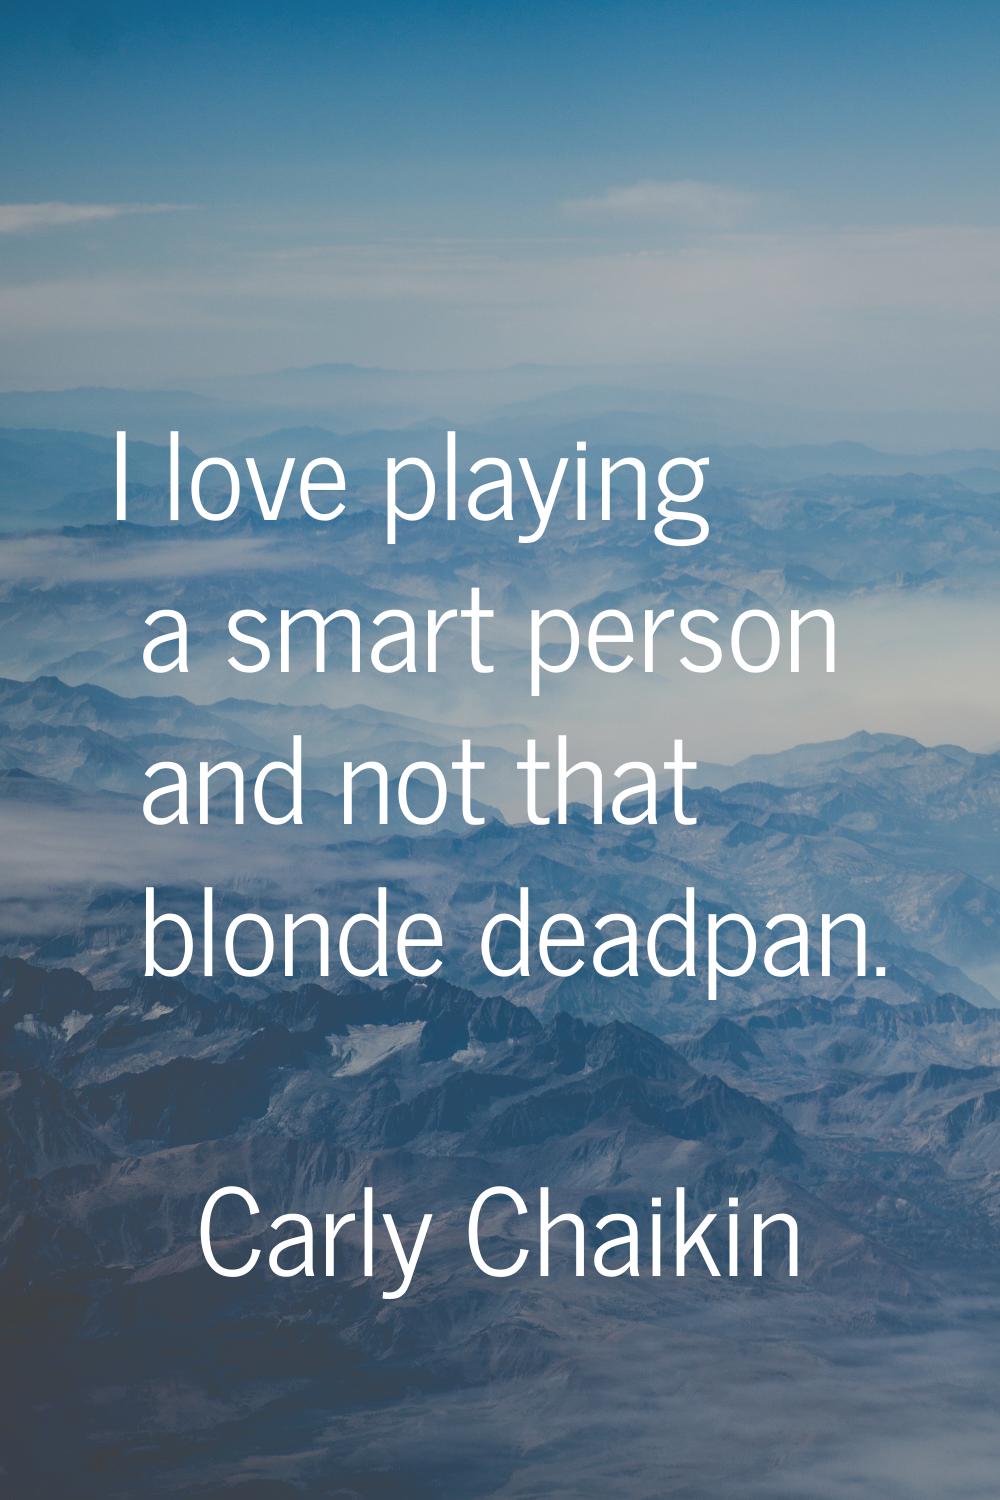 I love playing a smart person and not that blonde deadpan.